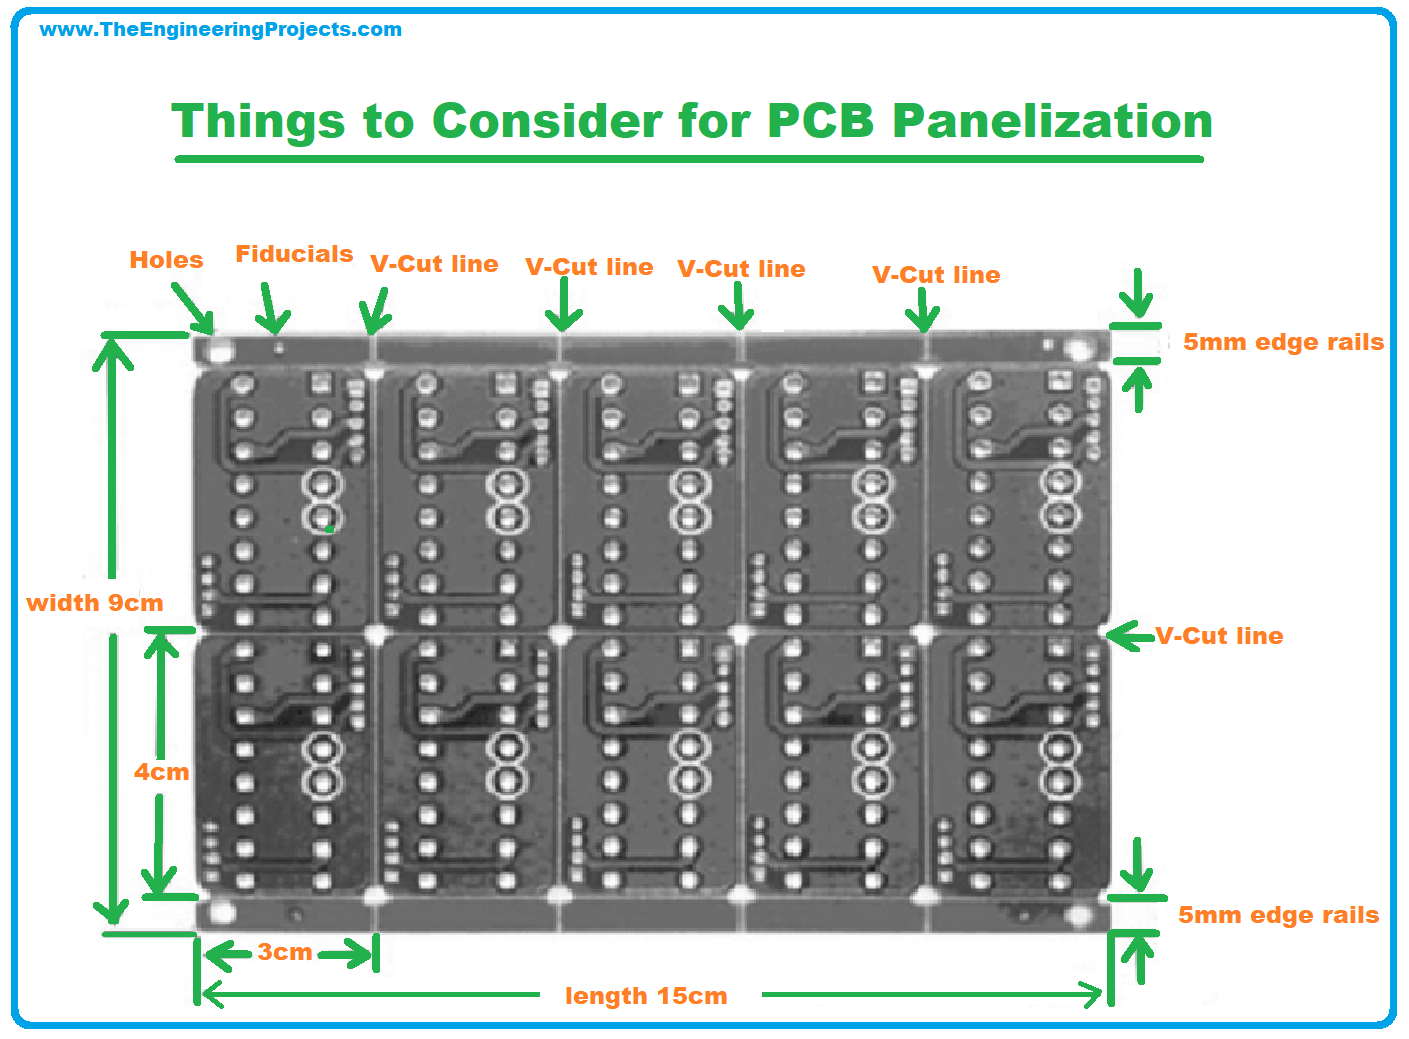 What is PCB Panelization, PCB Panelization Definition, Why need PCB Panelization, Combinations of PCB Panelization, AAAA Combination, ABAB Combination, ABCD Panelization, Types of PCB Panelization, Advantages of PCB Panelization